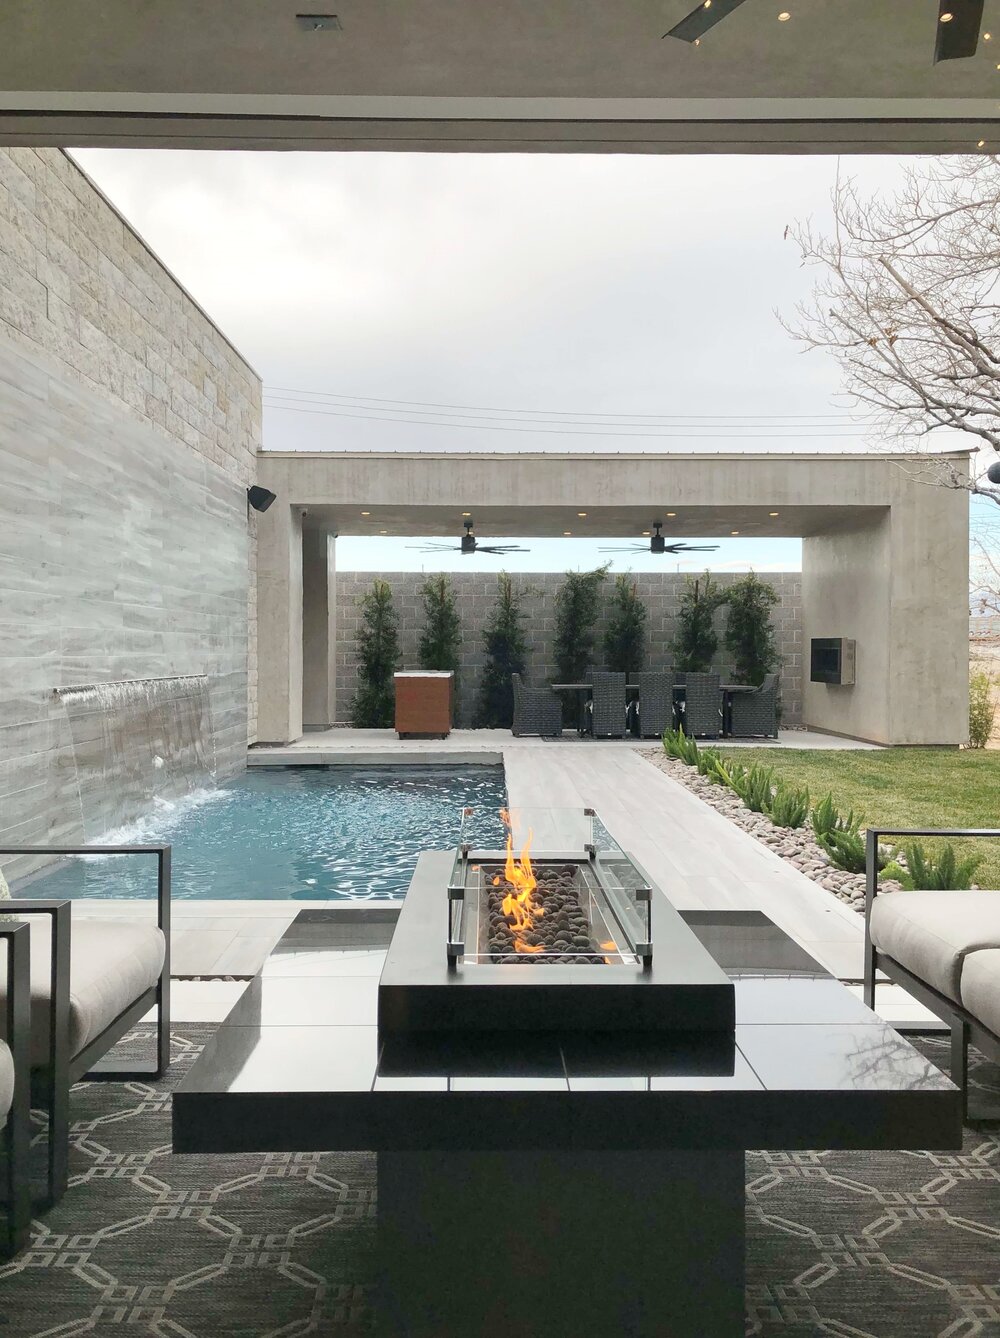 Contemporary outdoor living oasis at The New American Remodel TNAR | #remodeling #remodel #outdoorliving #patio #pool #outdoorfirepit